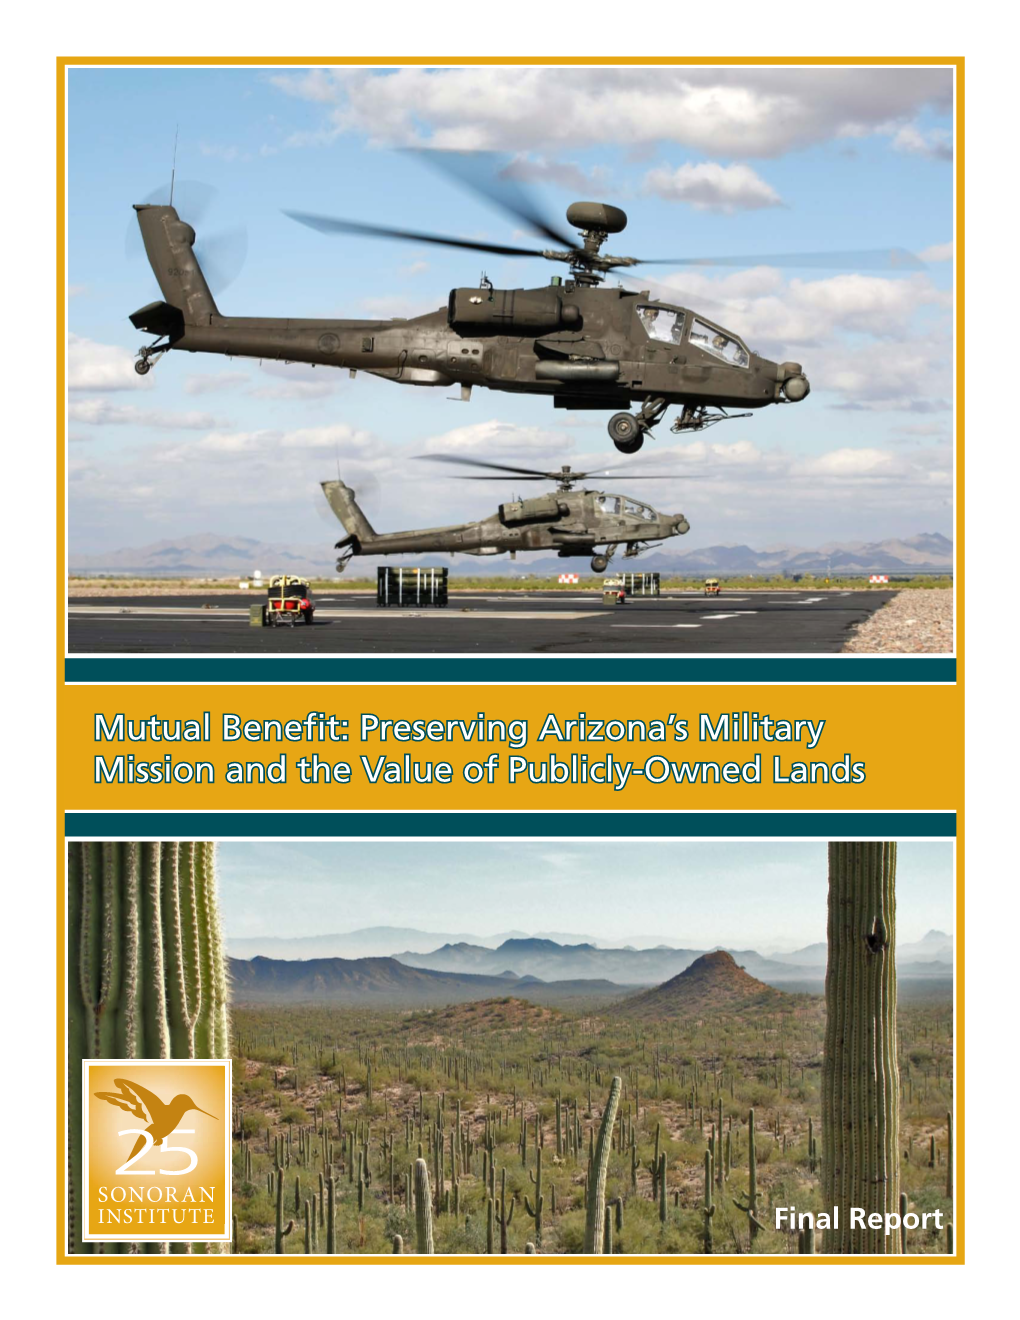 Preserving Arizona's Military Mission and the Value of Publicly-Owned